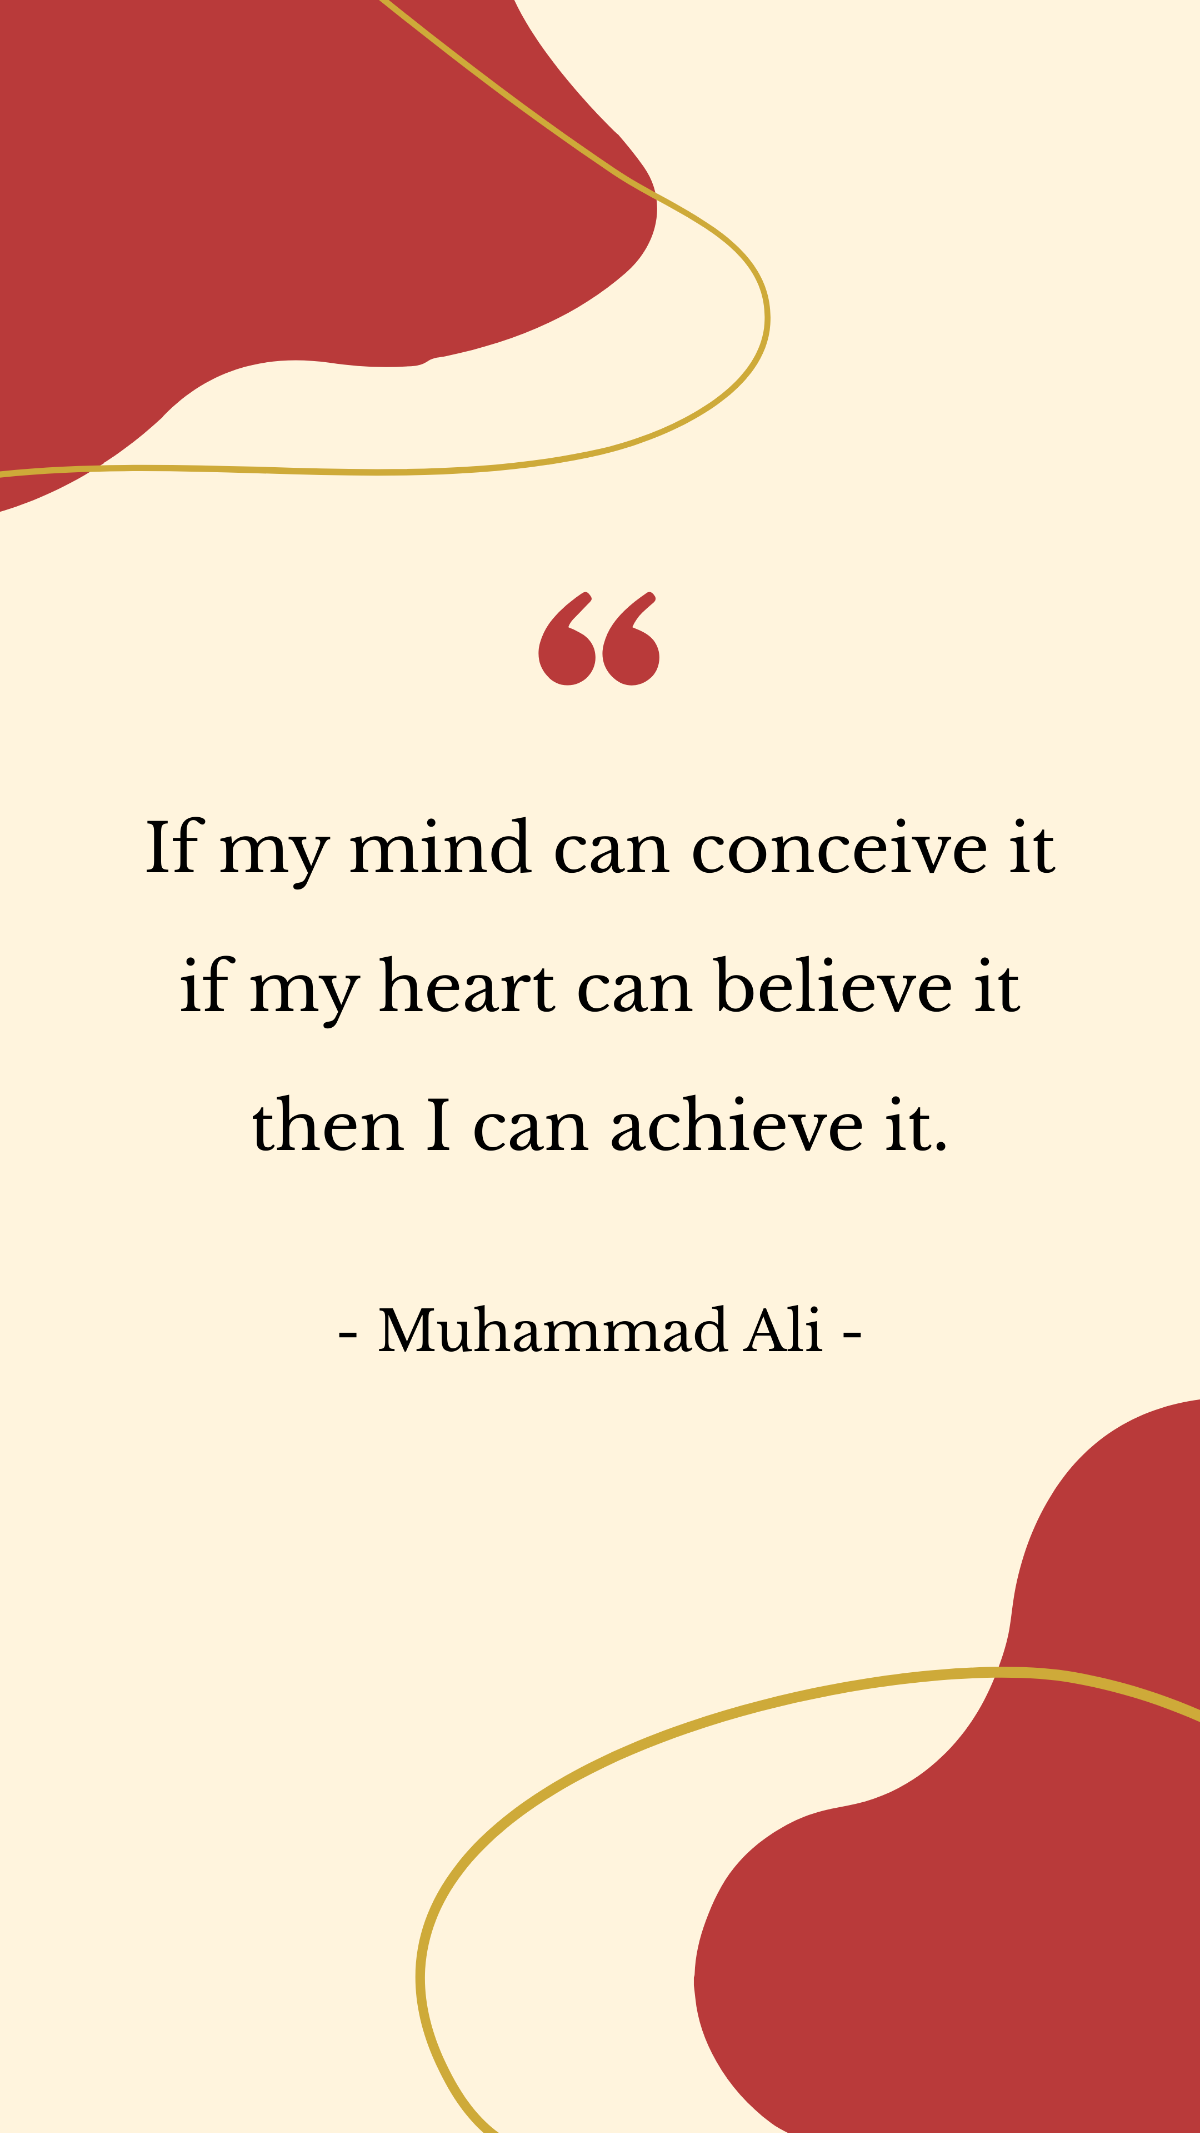 Muhammad Ali - If my mind can conceive it if my heart can believe it then I can achieve it. Template